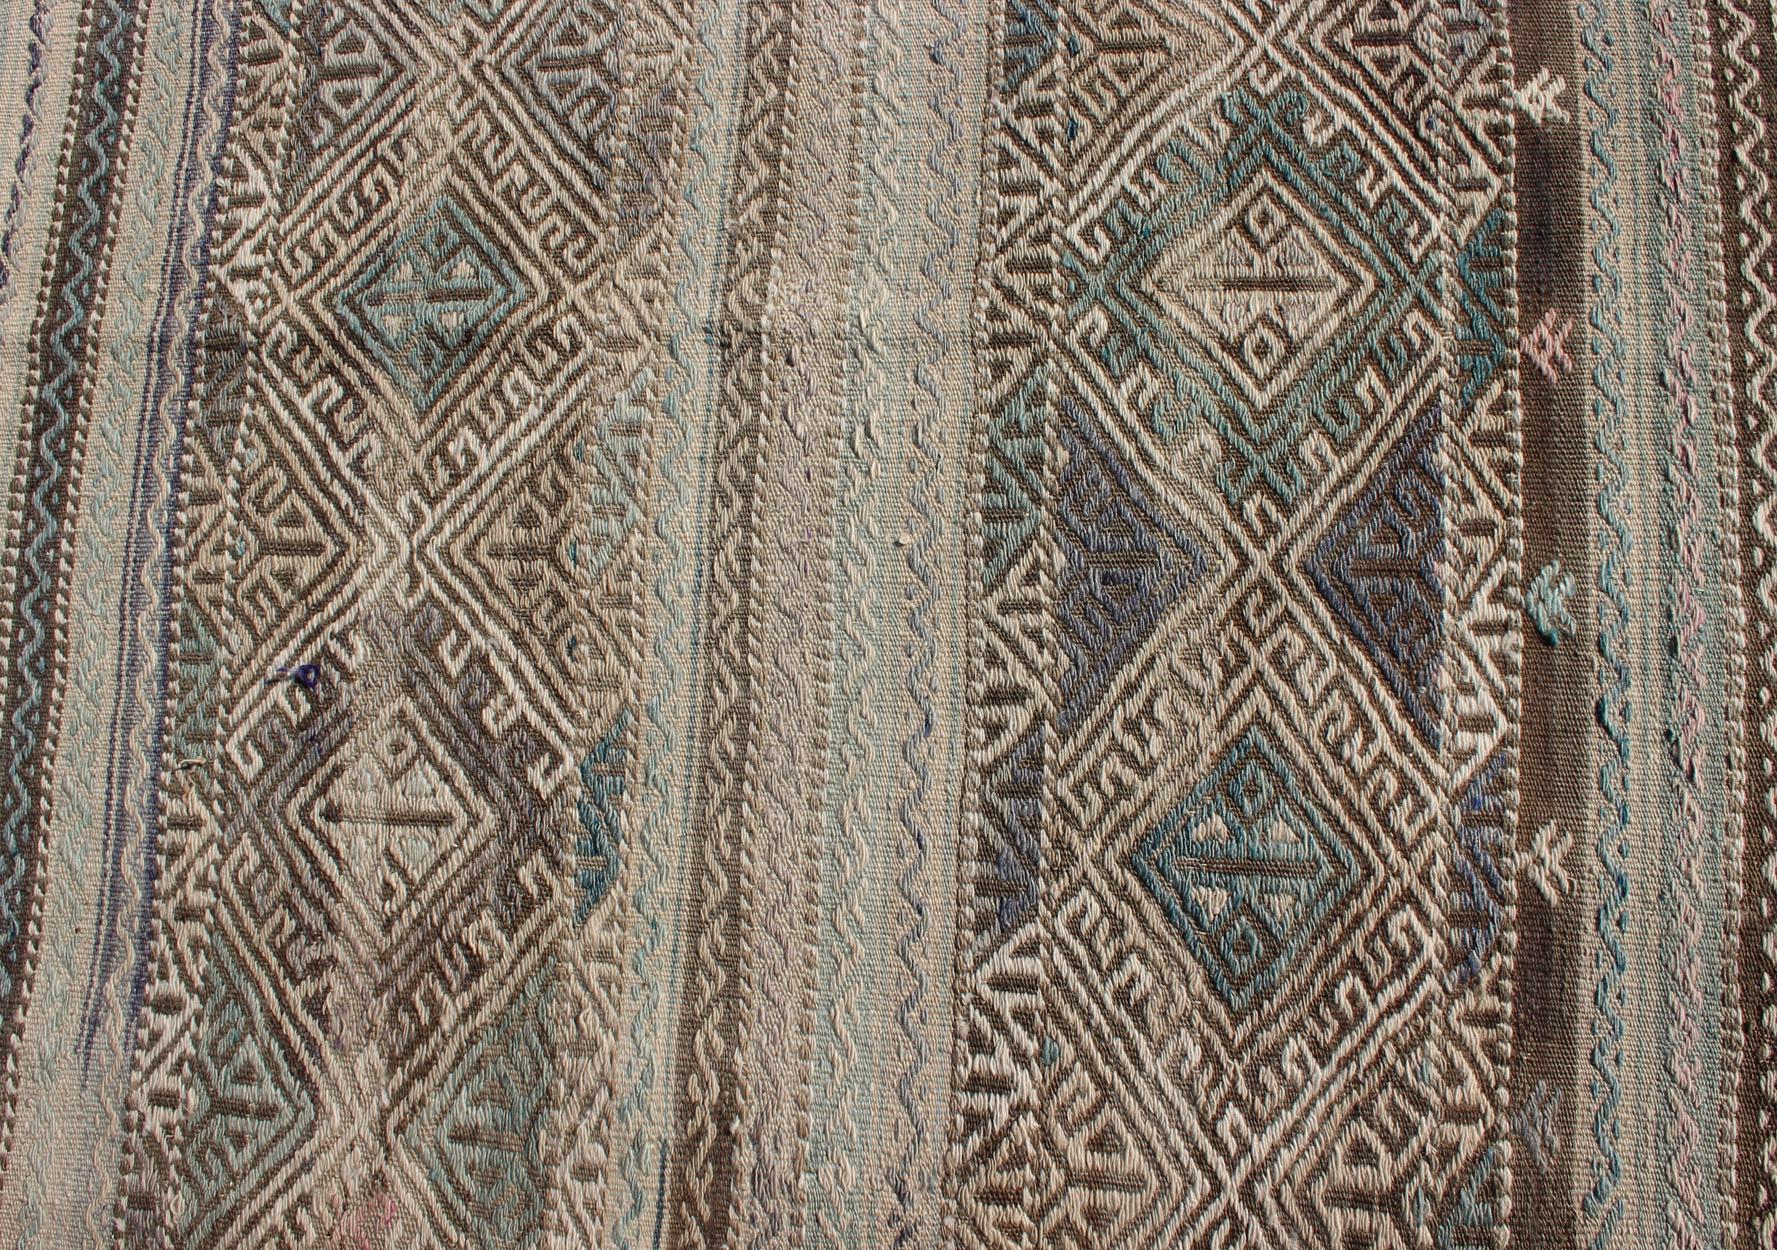 Flat-Weave Embroideries Kilim in Taupe, Green, Teal, Blue and Brown For Sale 1